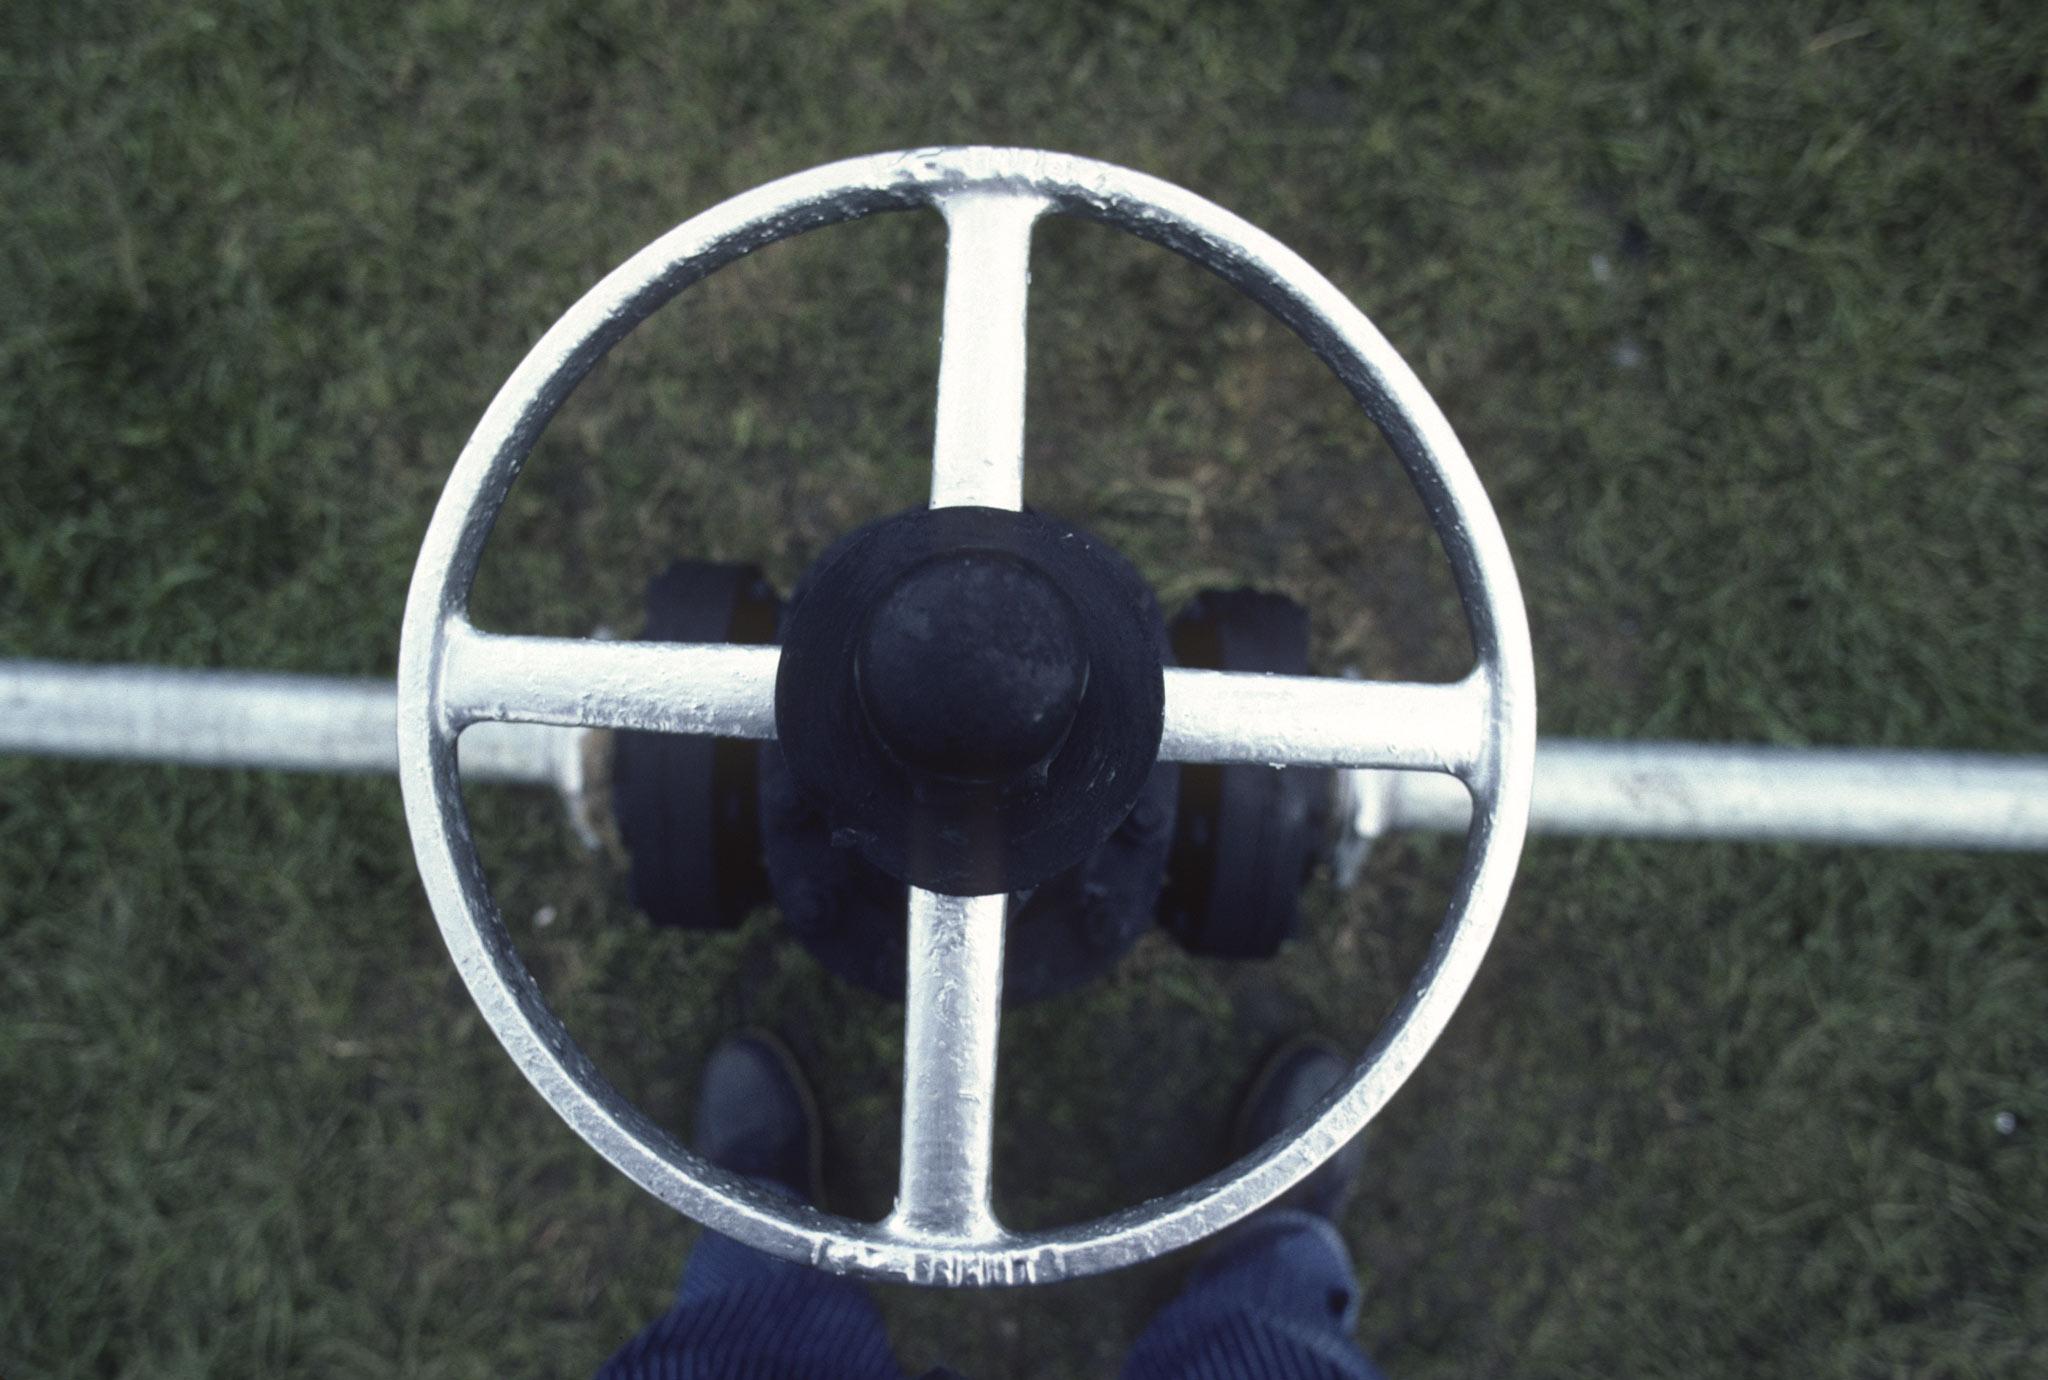 looking down on a galvanized steel valve with a persons shoes visible beneath it